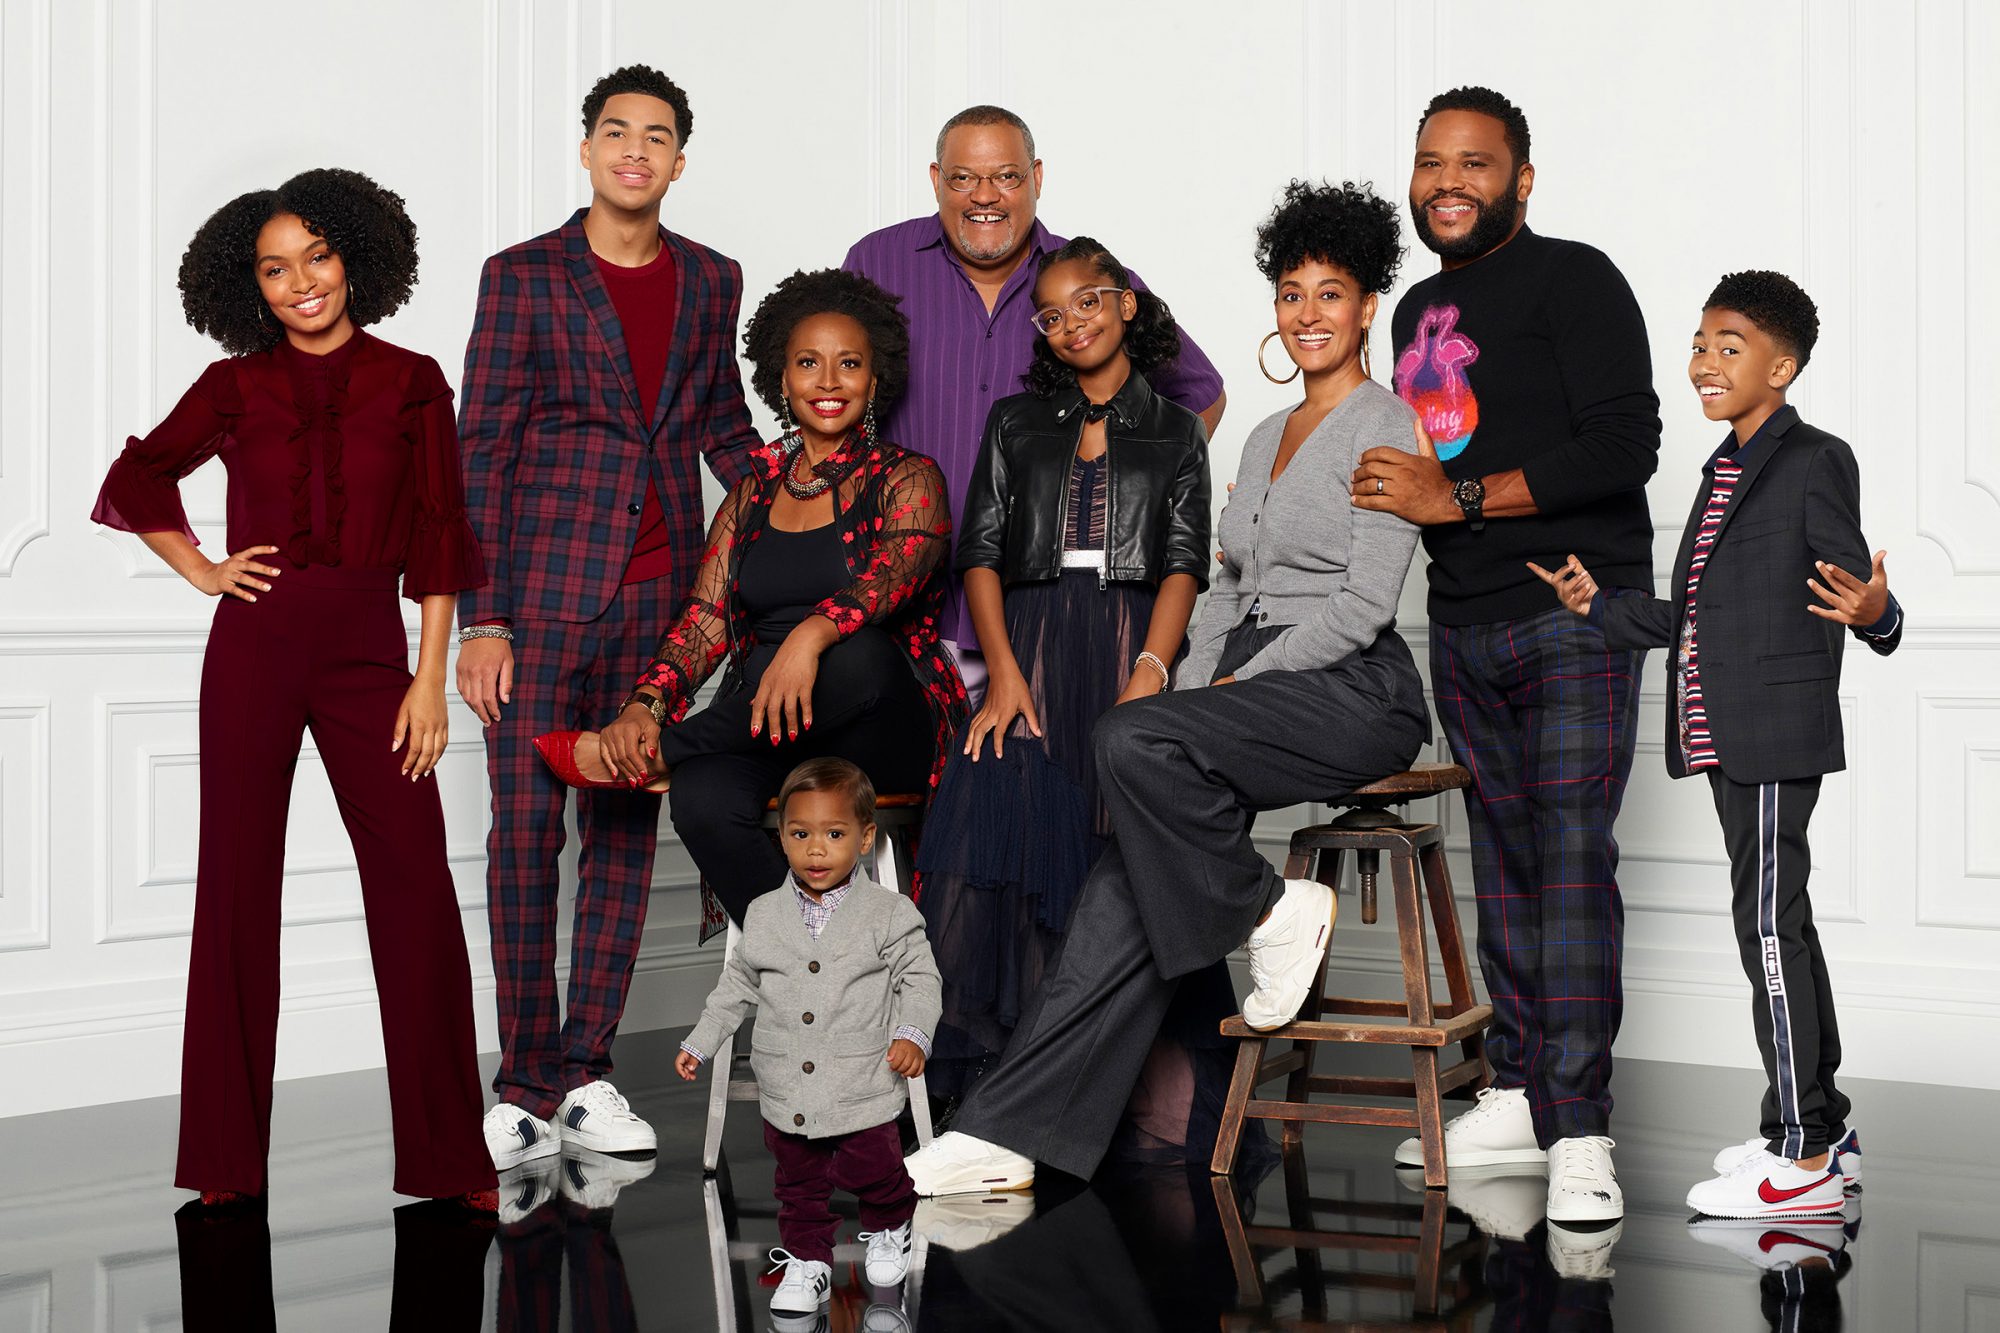 Old-ish: Black-ish Spinoff Confirmed With Jenifer Lewis, Laurence Fishburne